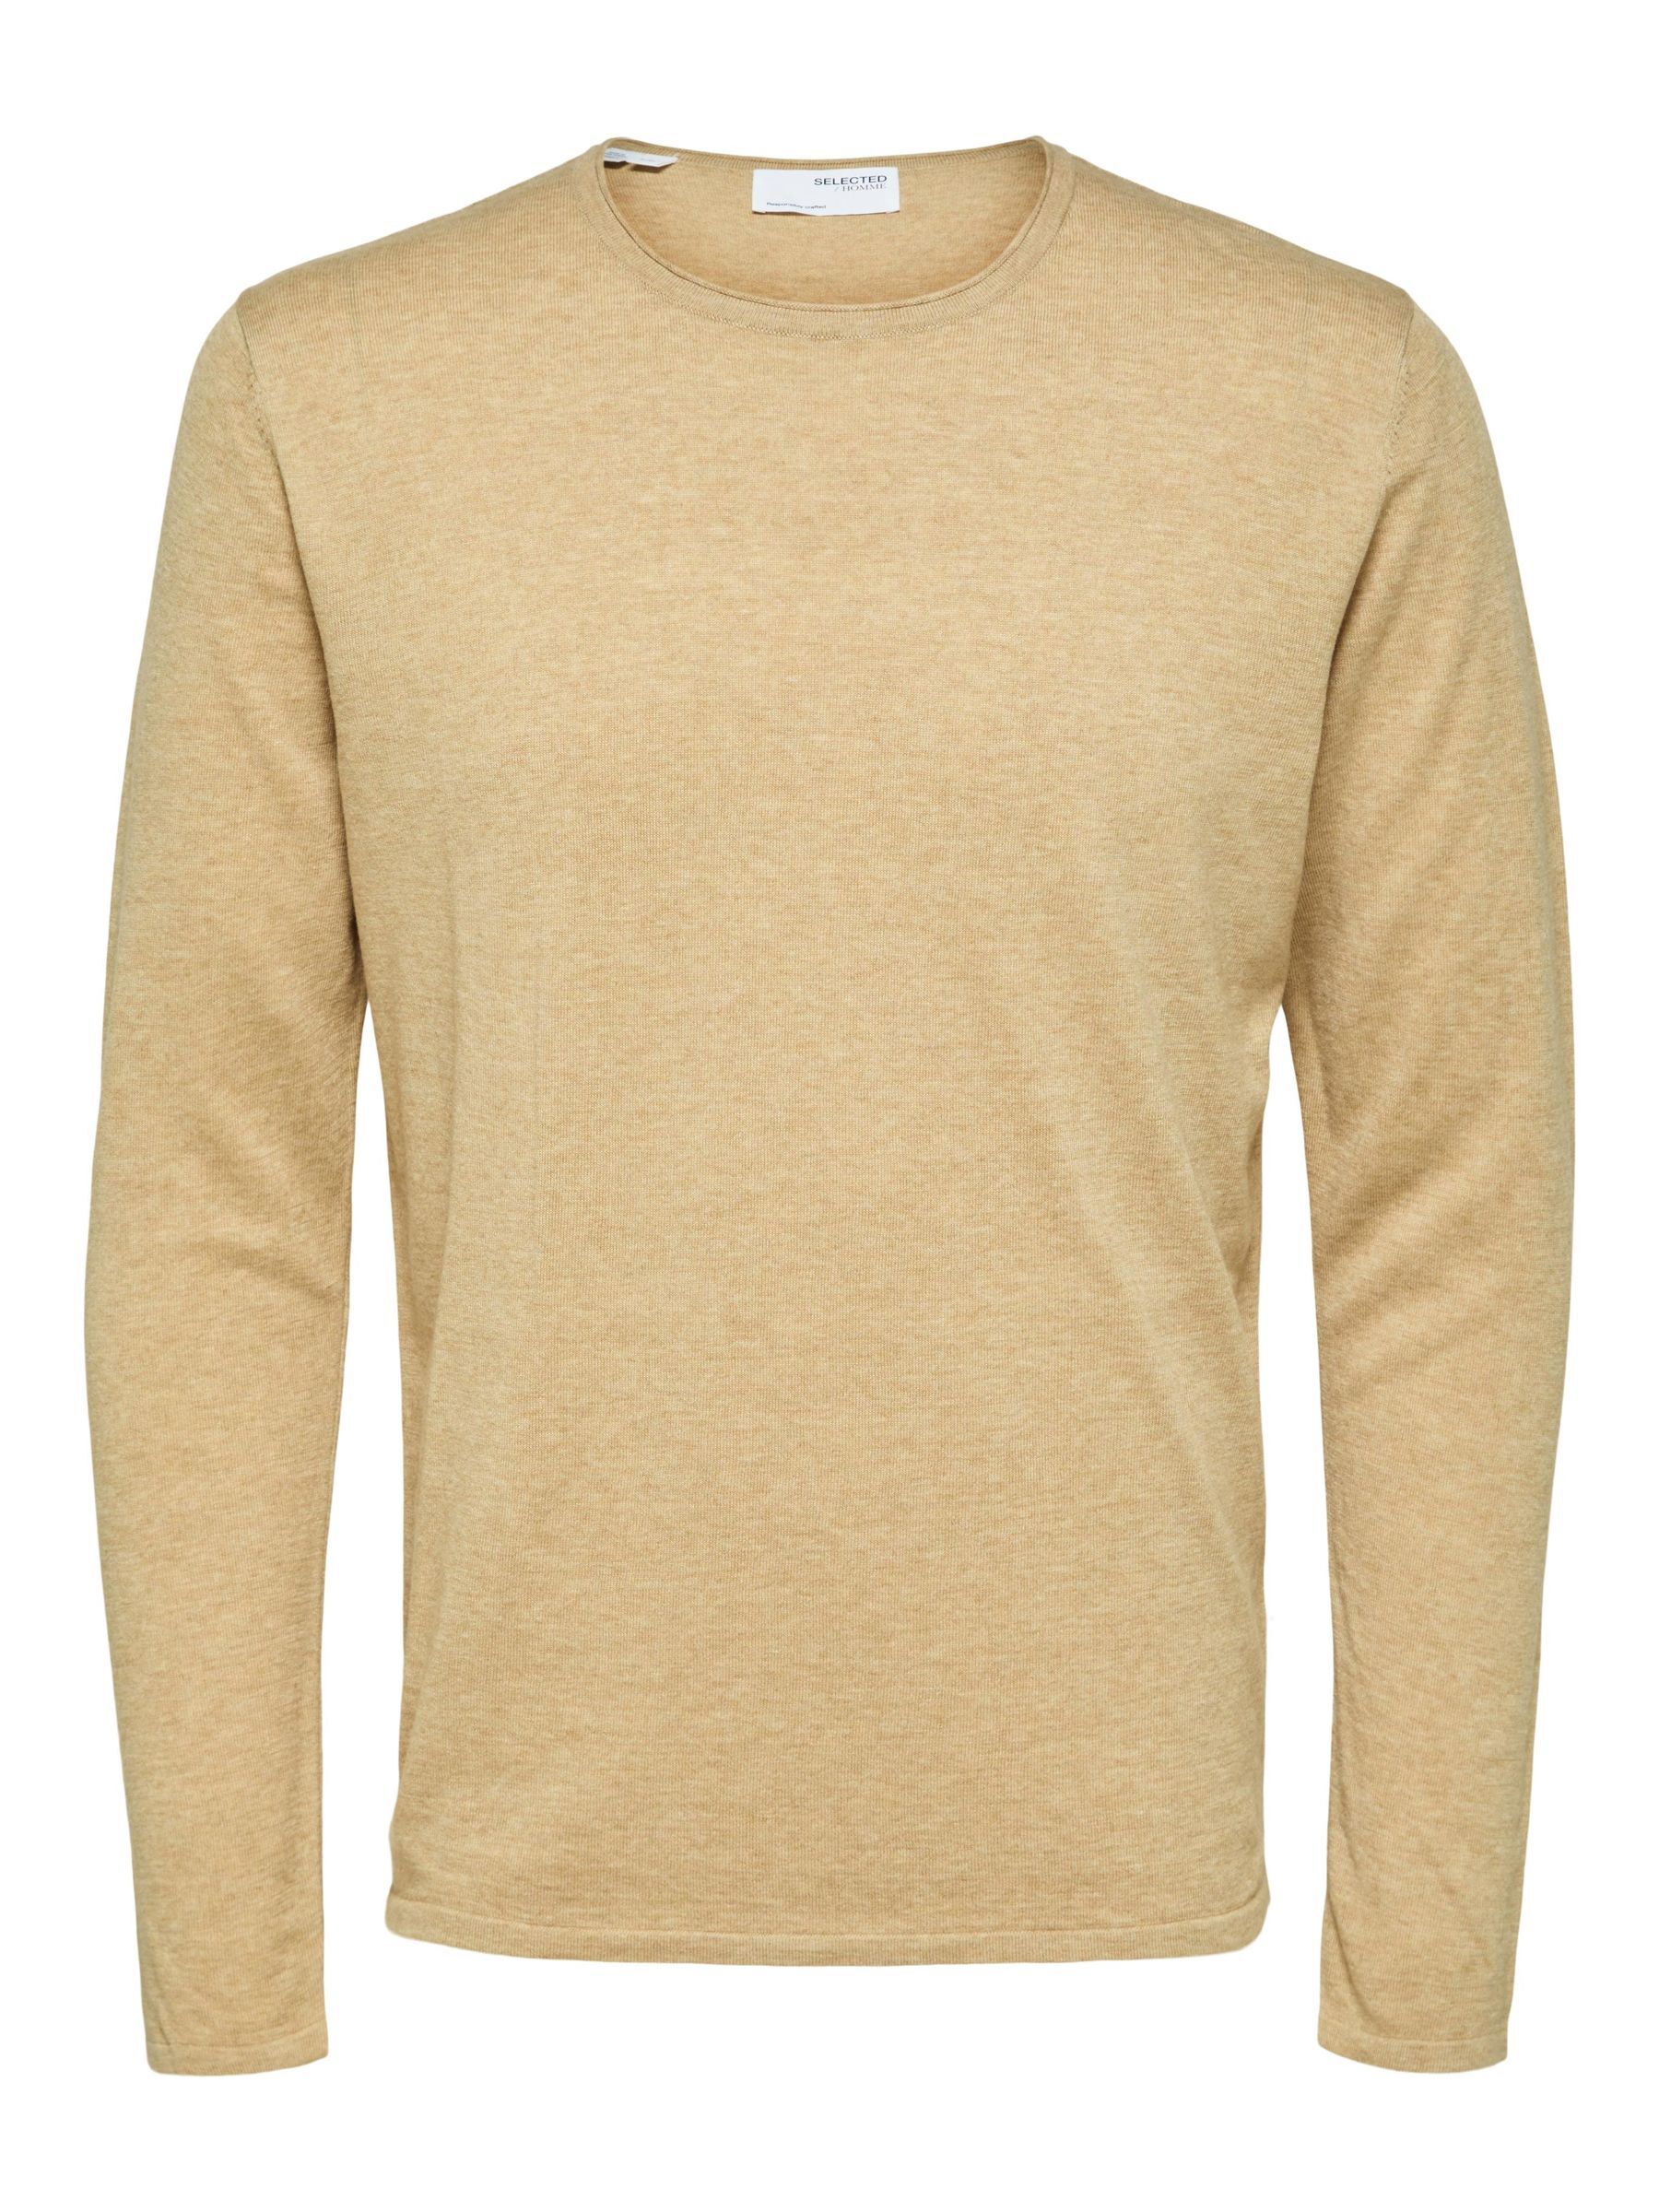 Selected SLHROME LS KNIT CREW NECK B NOOS bruin/beige-3 1